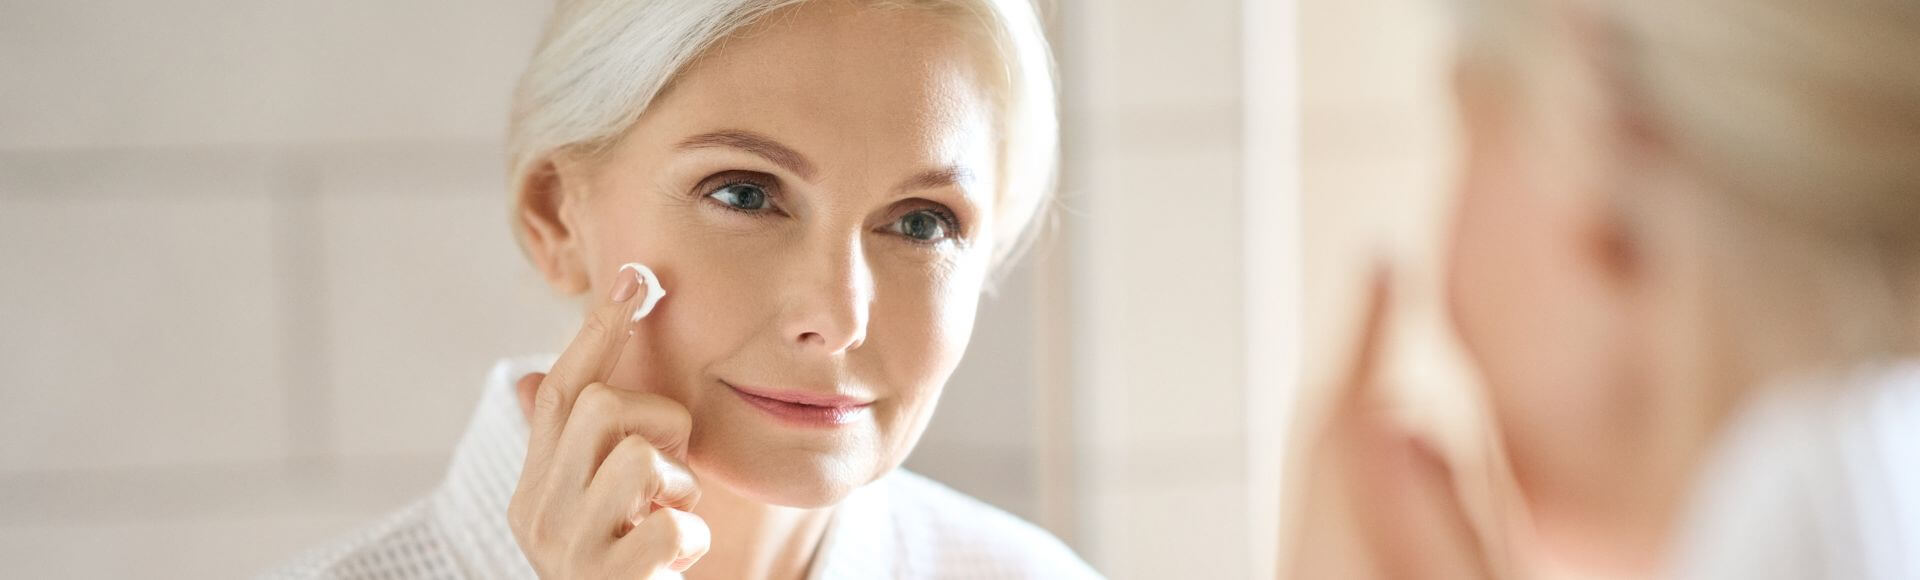 Skin Care Routine For Women Over 40: 5 Important Tips